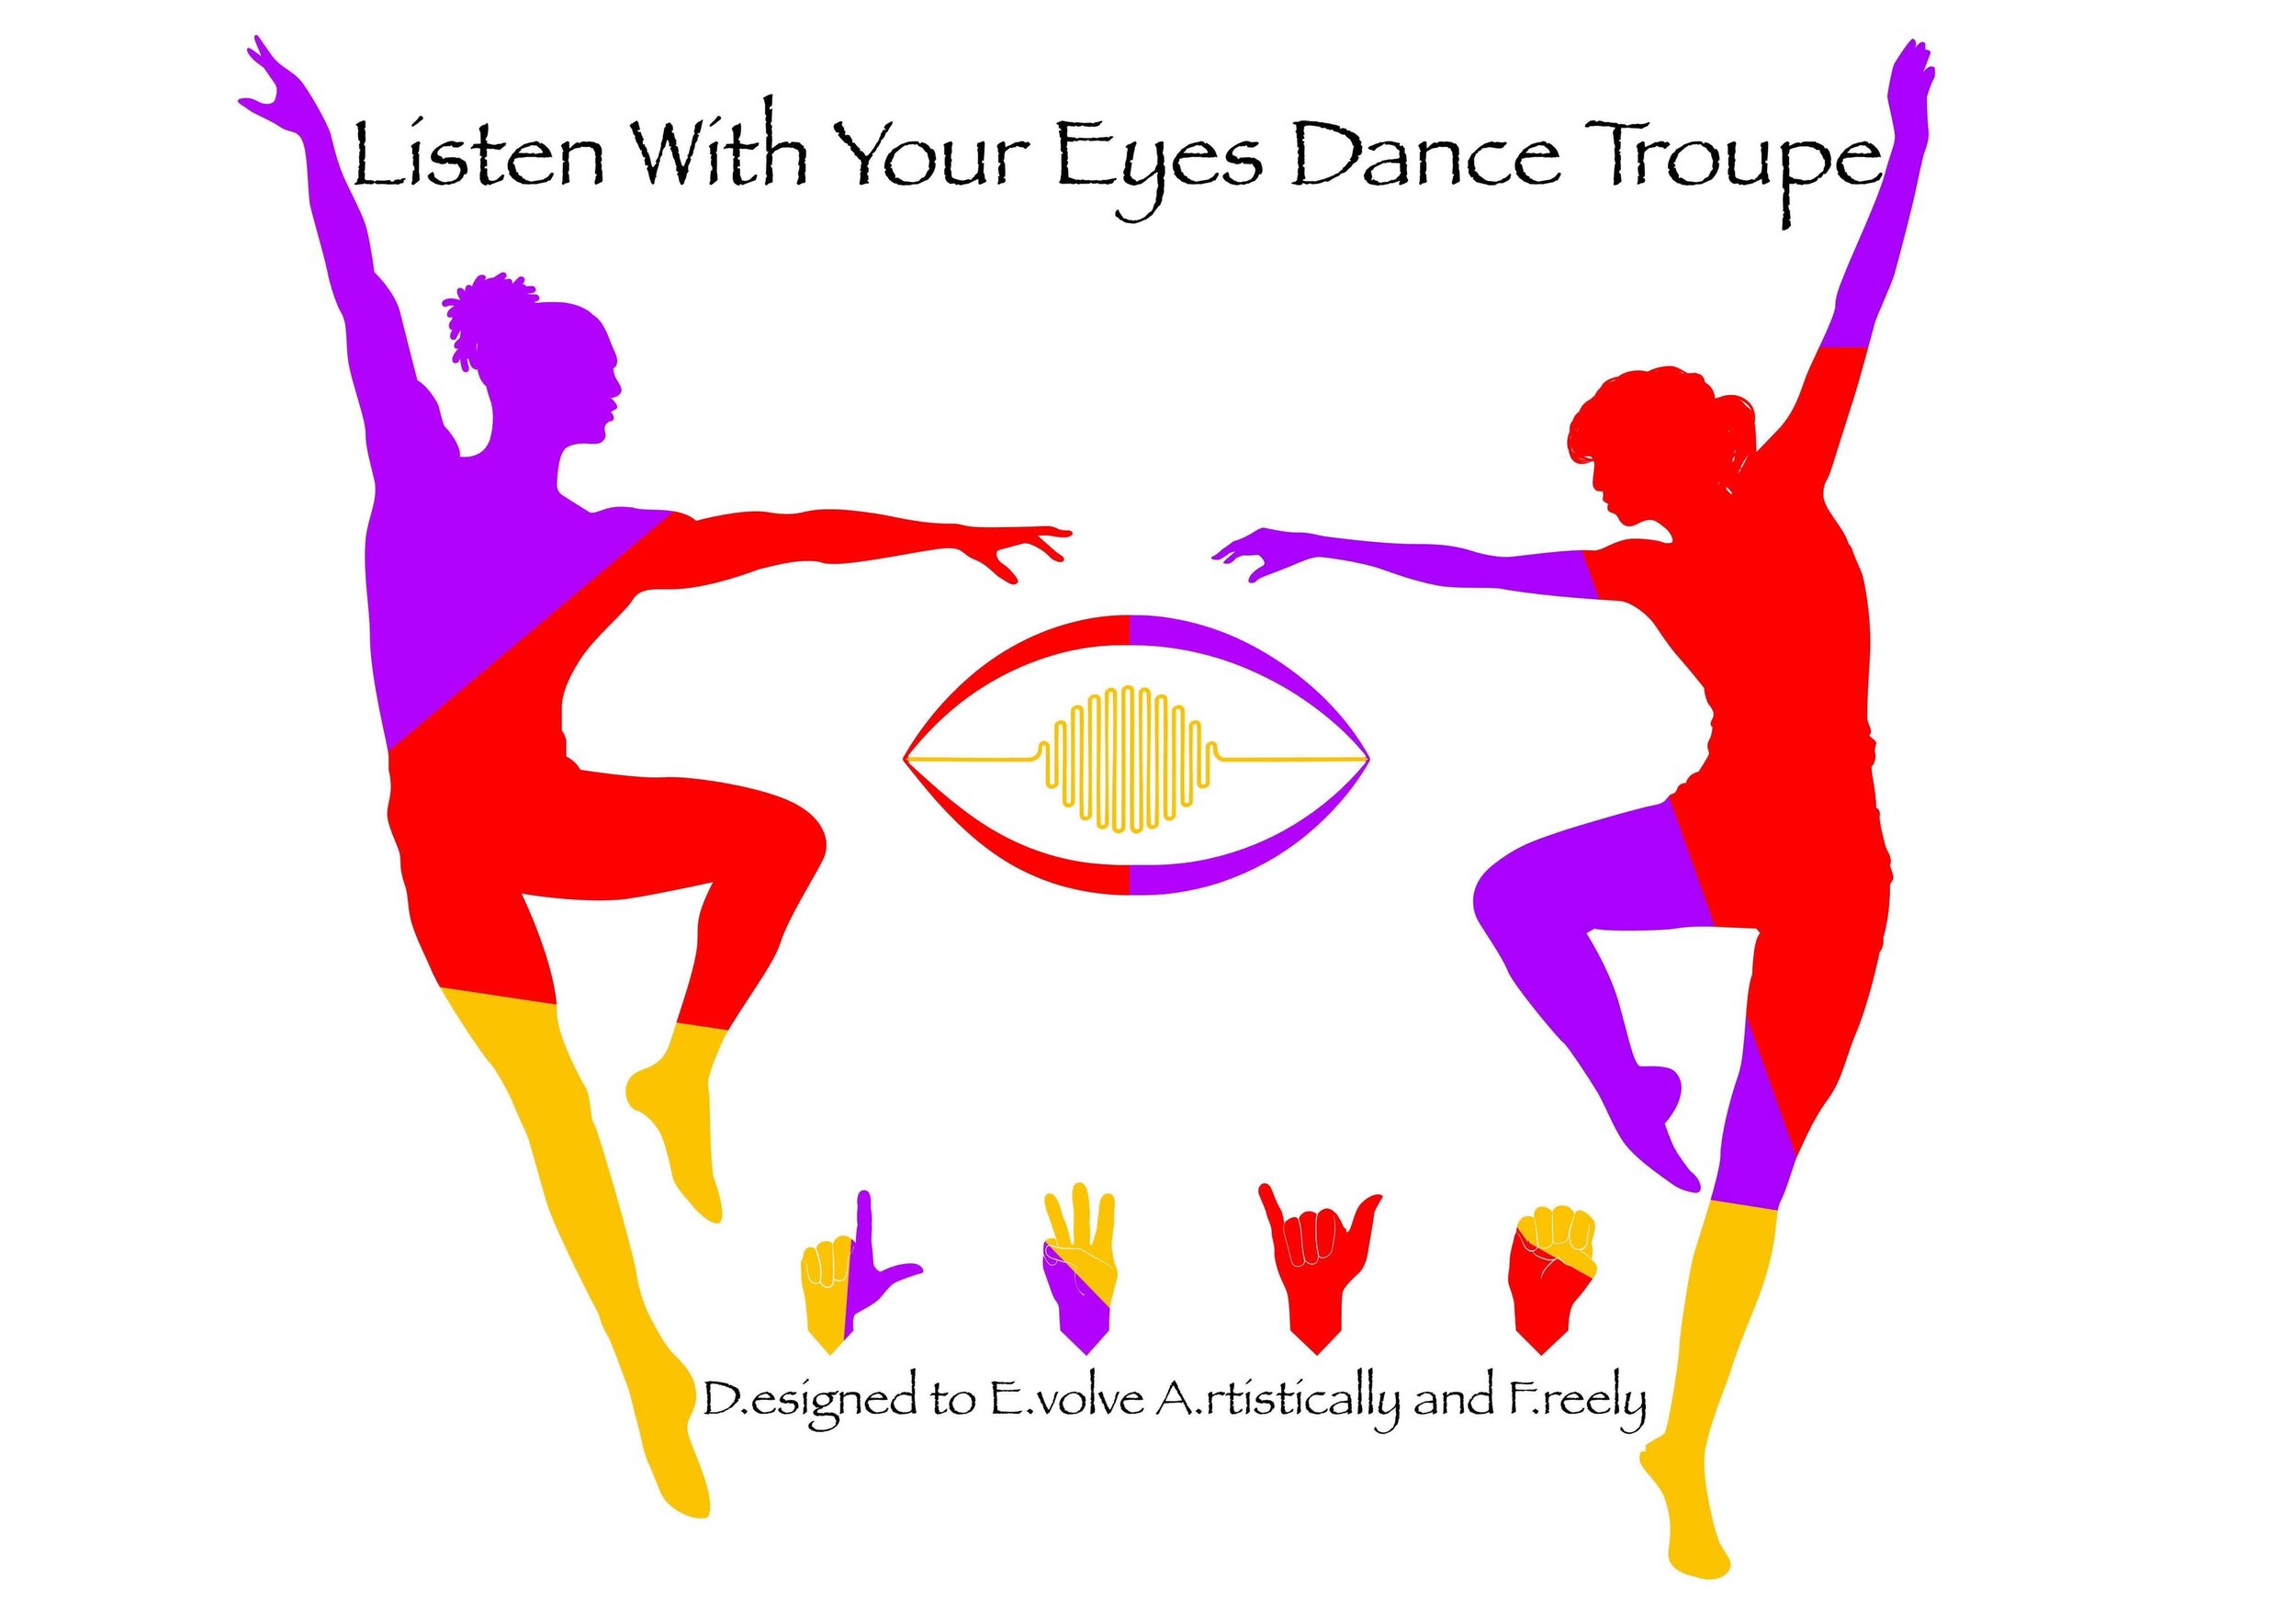 Listen with Your Eyes Dance Troupe